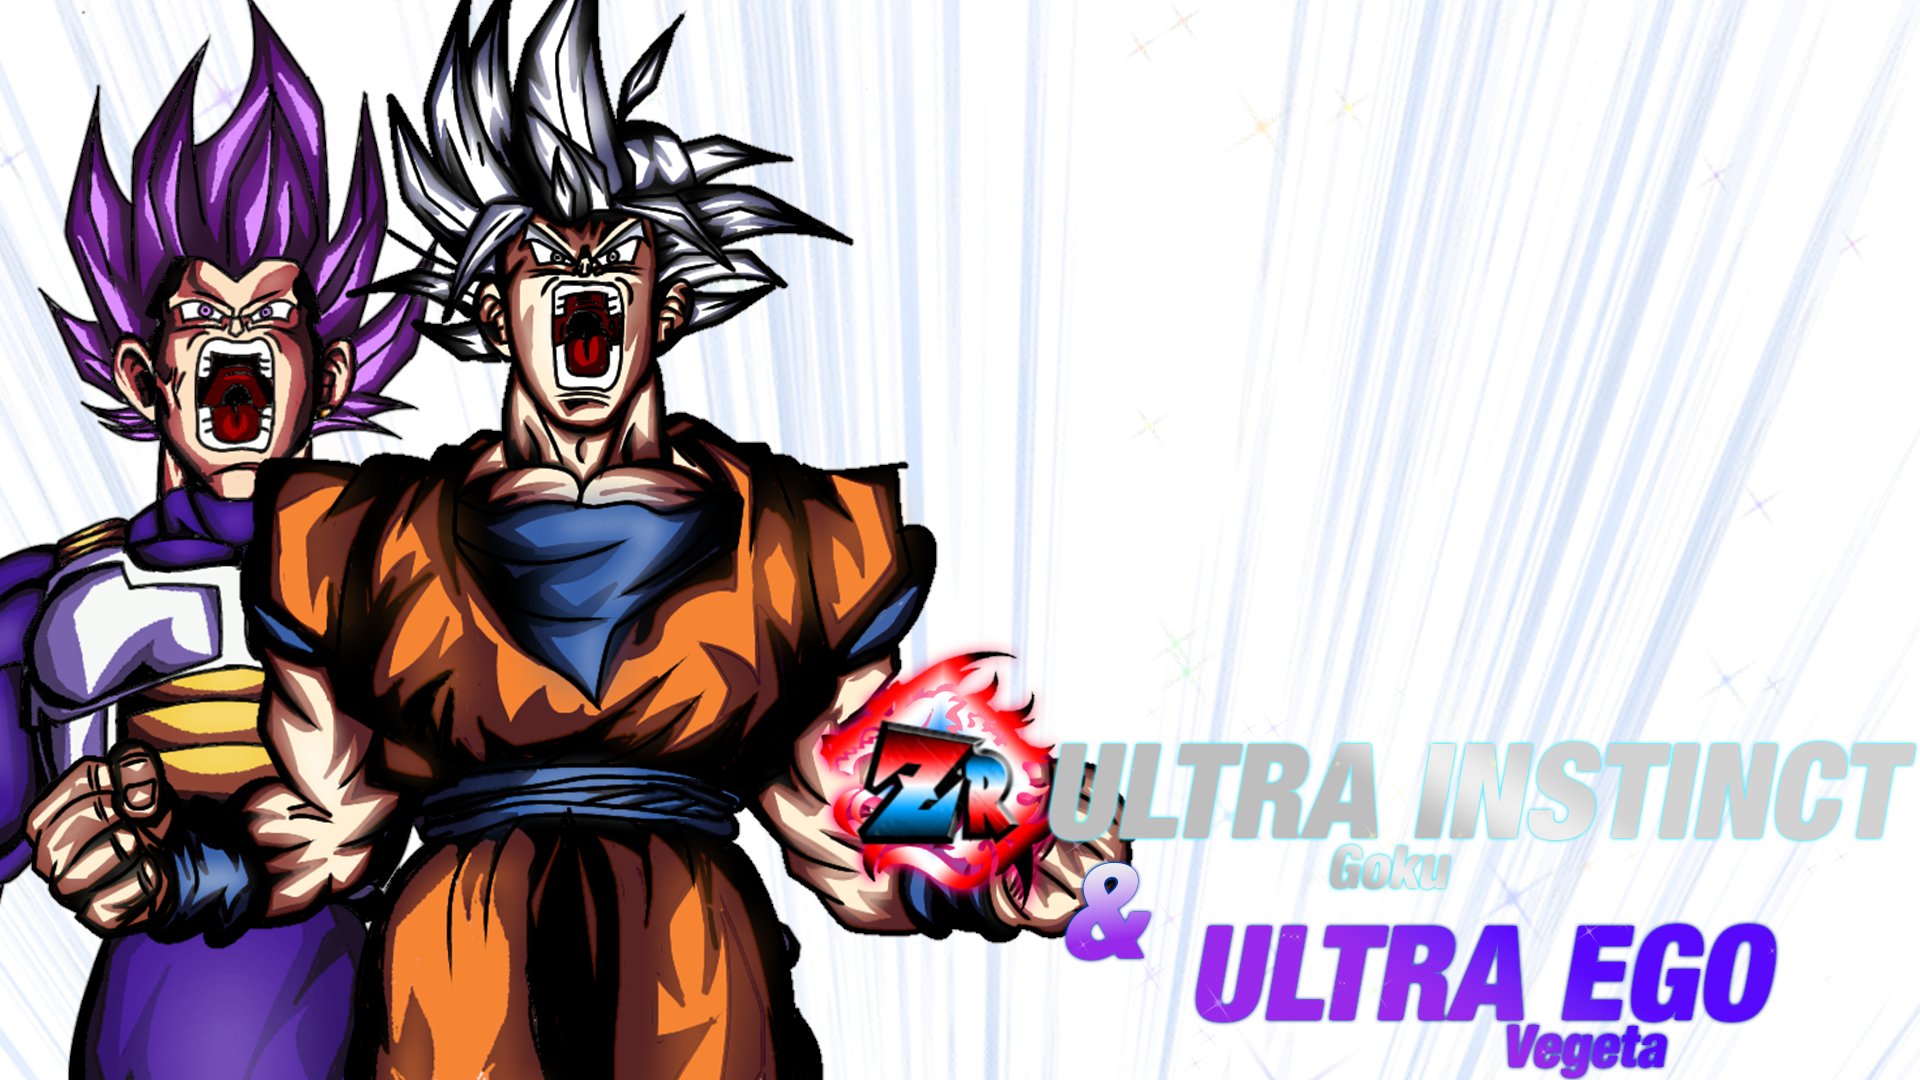 Dokkan Entropy - [Announcement] The Dokkan Entropy First Anniversary is coming! Stay Tuned! #DokkanEntropy